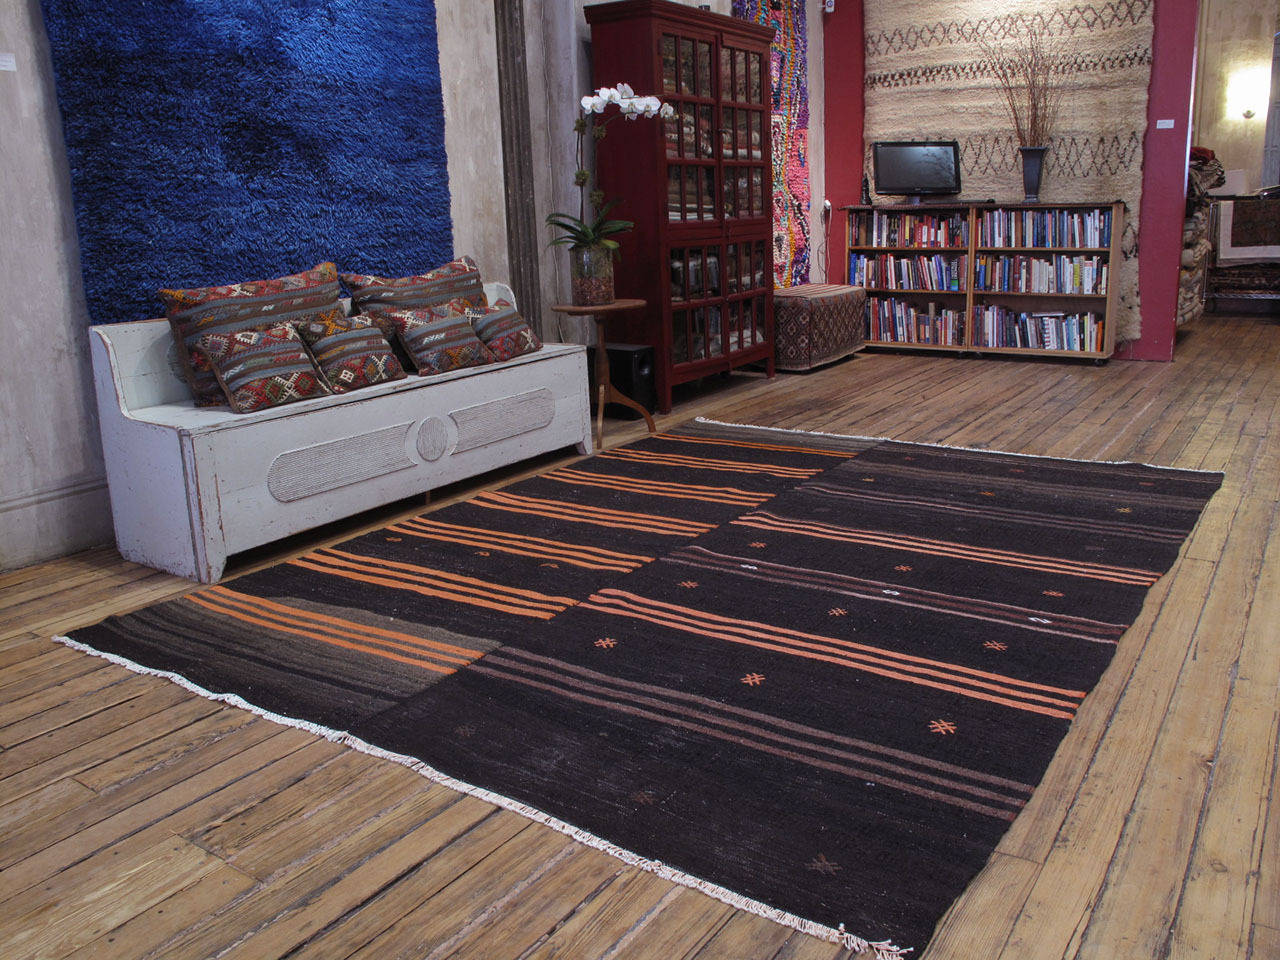 A rather Primitive tribal flat-weave from Southeastern Turkey, woven with goat hair, in two asymmetrical panels. Woven as a hard-wearing, everyday floor cover, it is quite appealing due to its authentic simplicity.